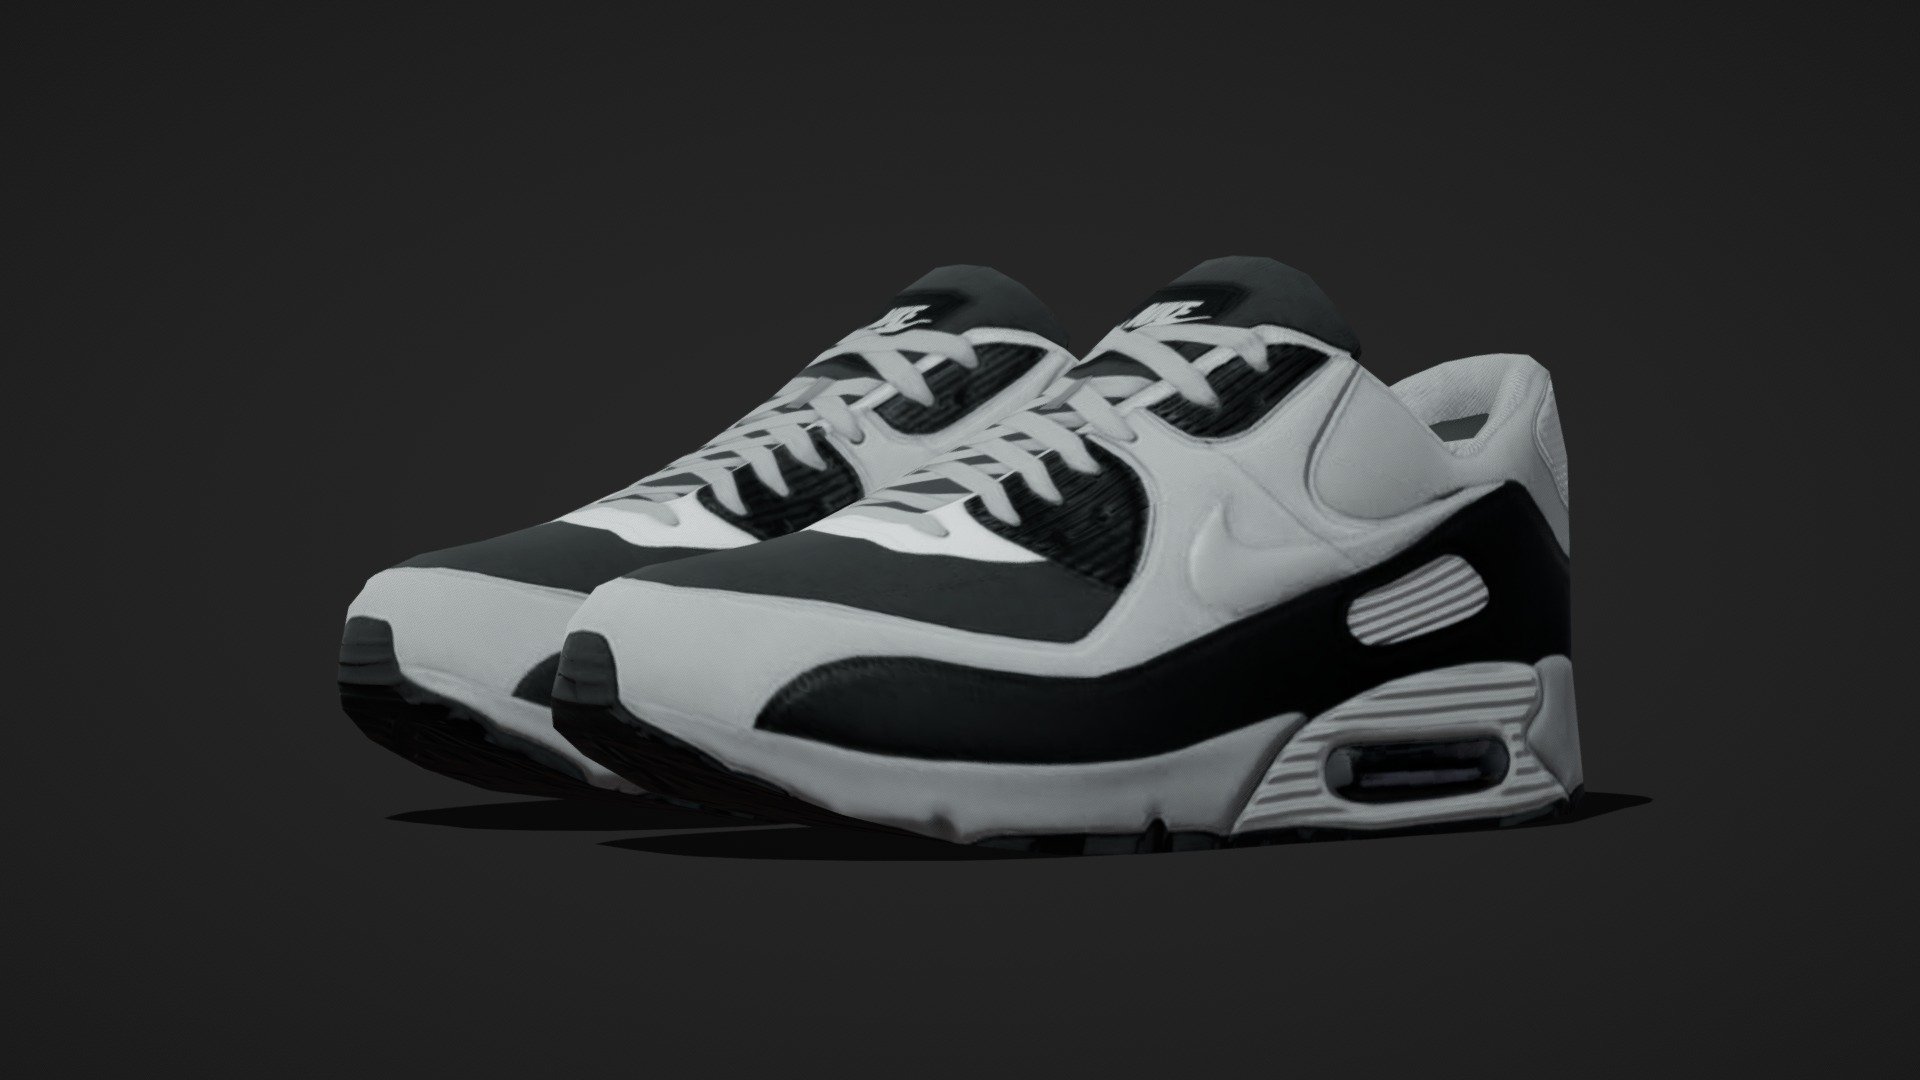 Airmax NIKE Shoes model in very low poly style.

GLB File size under 400 kb

Model : Poly Count - 1328 Tris.

Texture : 1k resolution.

Best suitable for Metaverse projects.

Pack of 10 : https://skfb.ly/oQuKA

Highpoly Model : https://skfb.ly/oxPyV - Airmax - Nike Shoes 01 - Very Low Poly - Buy Royalty Free 3D model by 5th Dimension (@5th-Dimension) 3d model